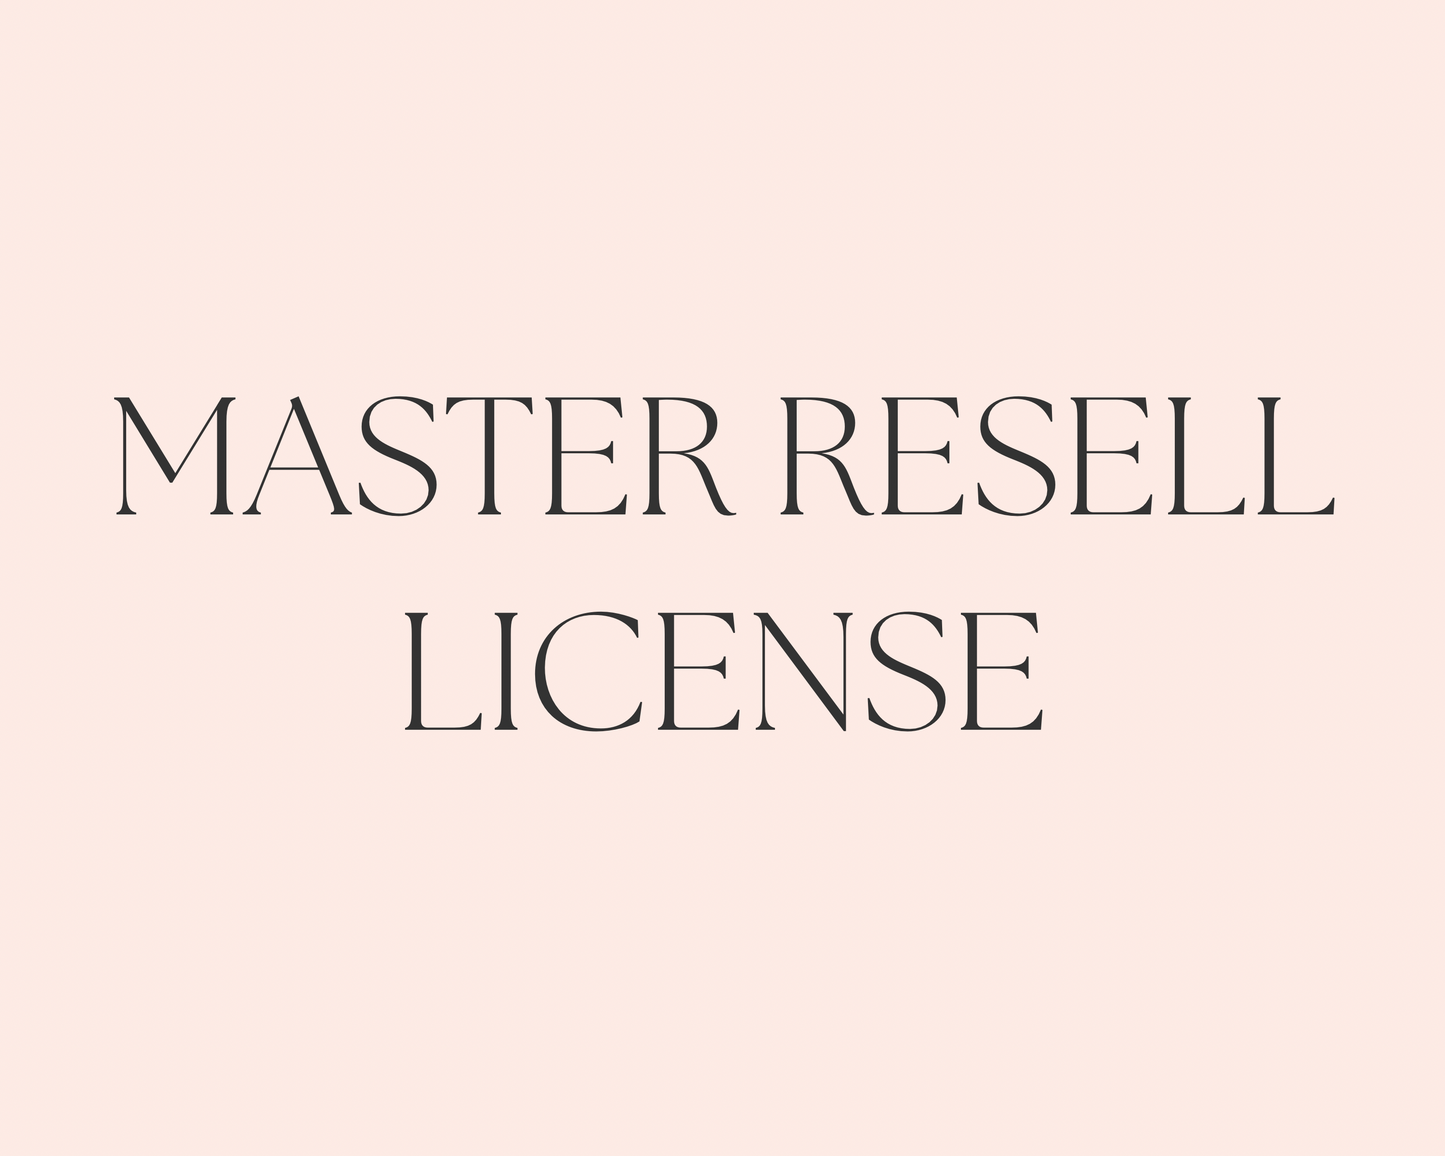 Master Resell License